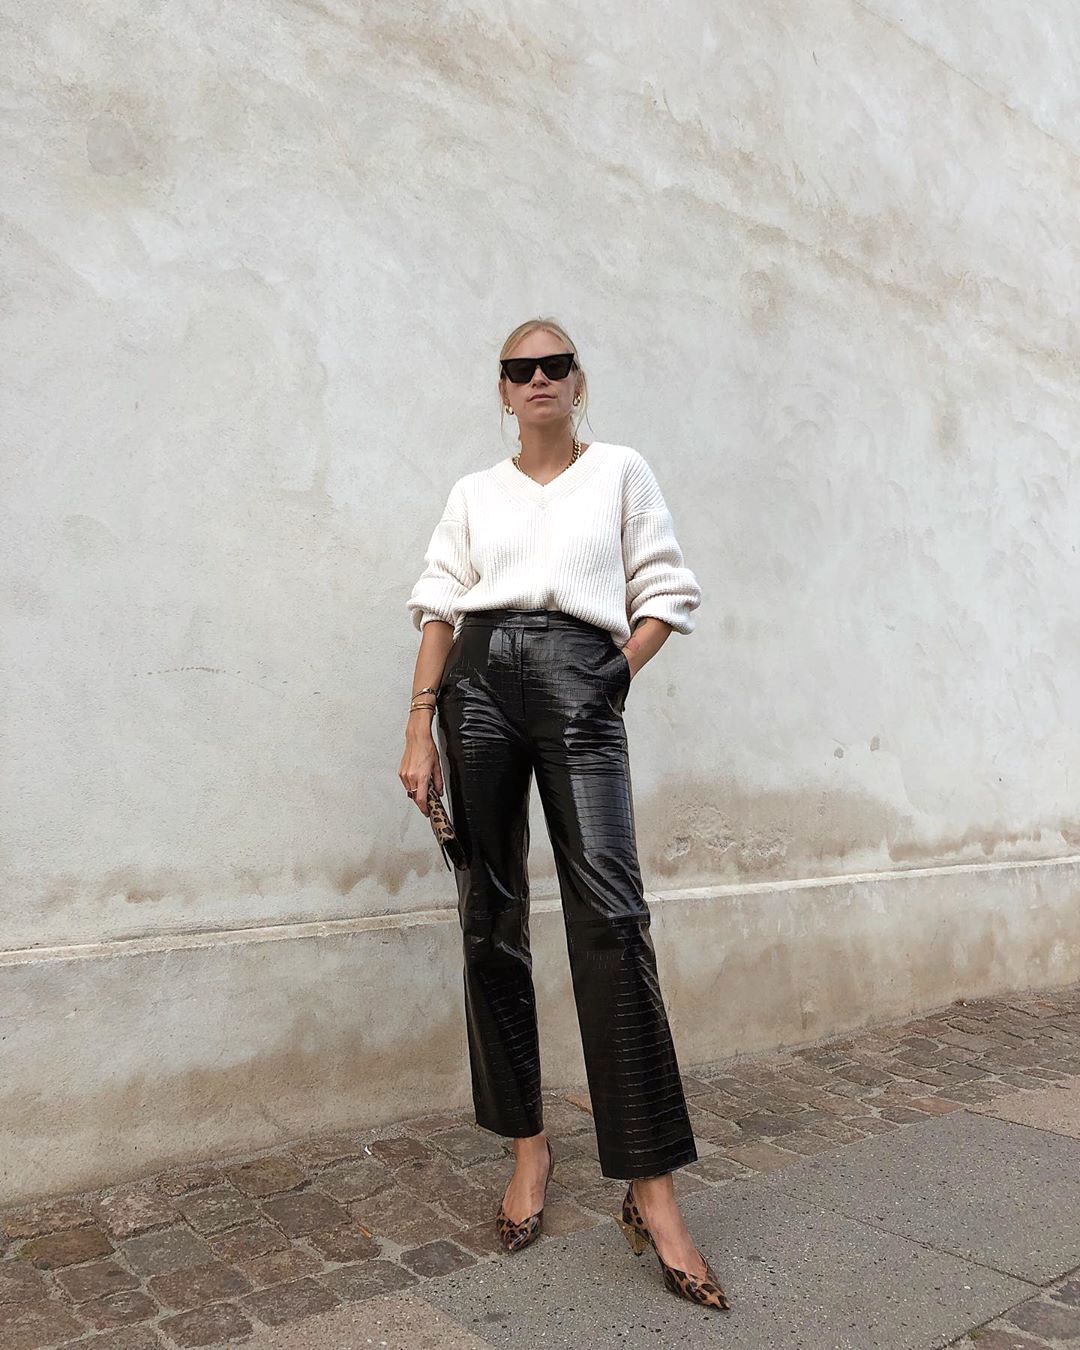 Le Fashion: A Stylish Way to Transition Patent Leather Pants Into Spring